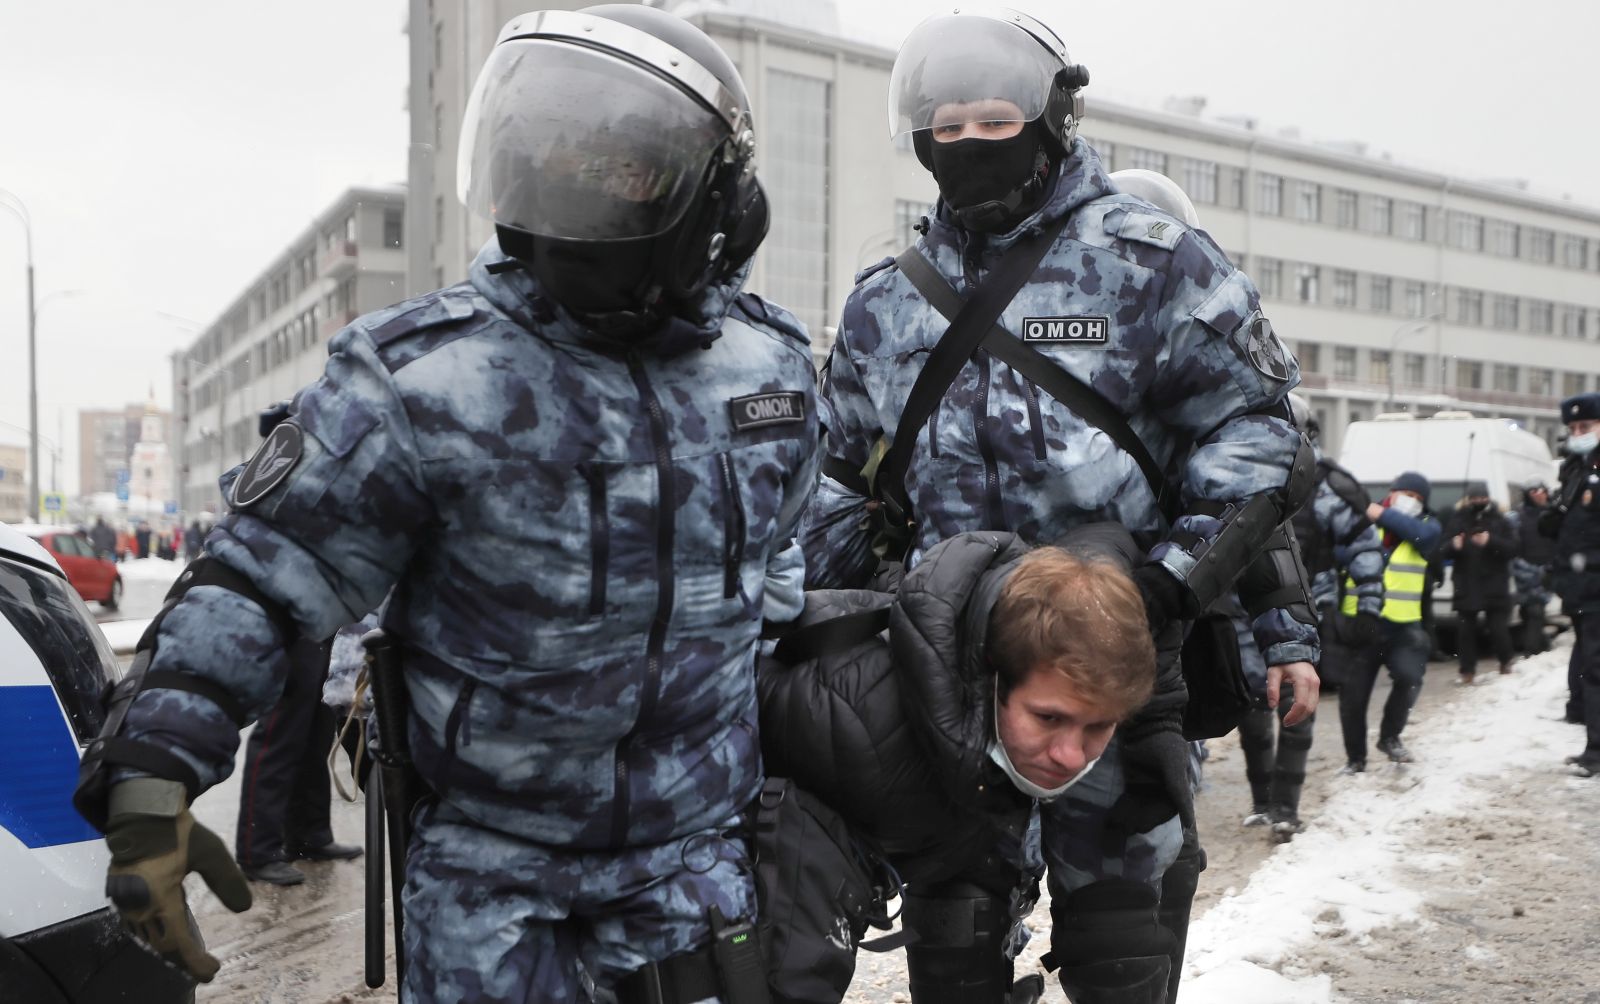 epa08976825 Russian police officers detain protester during an unauthorized protest in support of Russian opposition leader Alexei Navalny, Moscow, Russia, 31 January 2021. Navalny was detained after his arrival to Moscow from Germany, where he was recovering from a poisoning attack with a nerve agent, on 17 January 2021. A Moscow judge on 18 January ruled that he will remain in custody for 30 days following his airport arrest. Navalny urged Russians to take to the streets to protest. In many Russian cities mass events are prohibited due to an increase in COVID-19 cases.  EPA/YURI KOCHETKOV